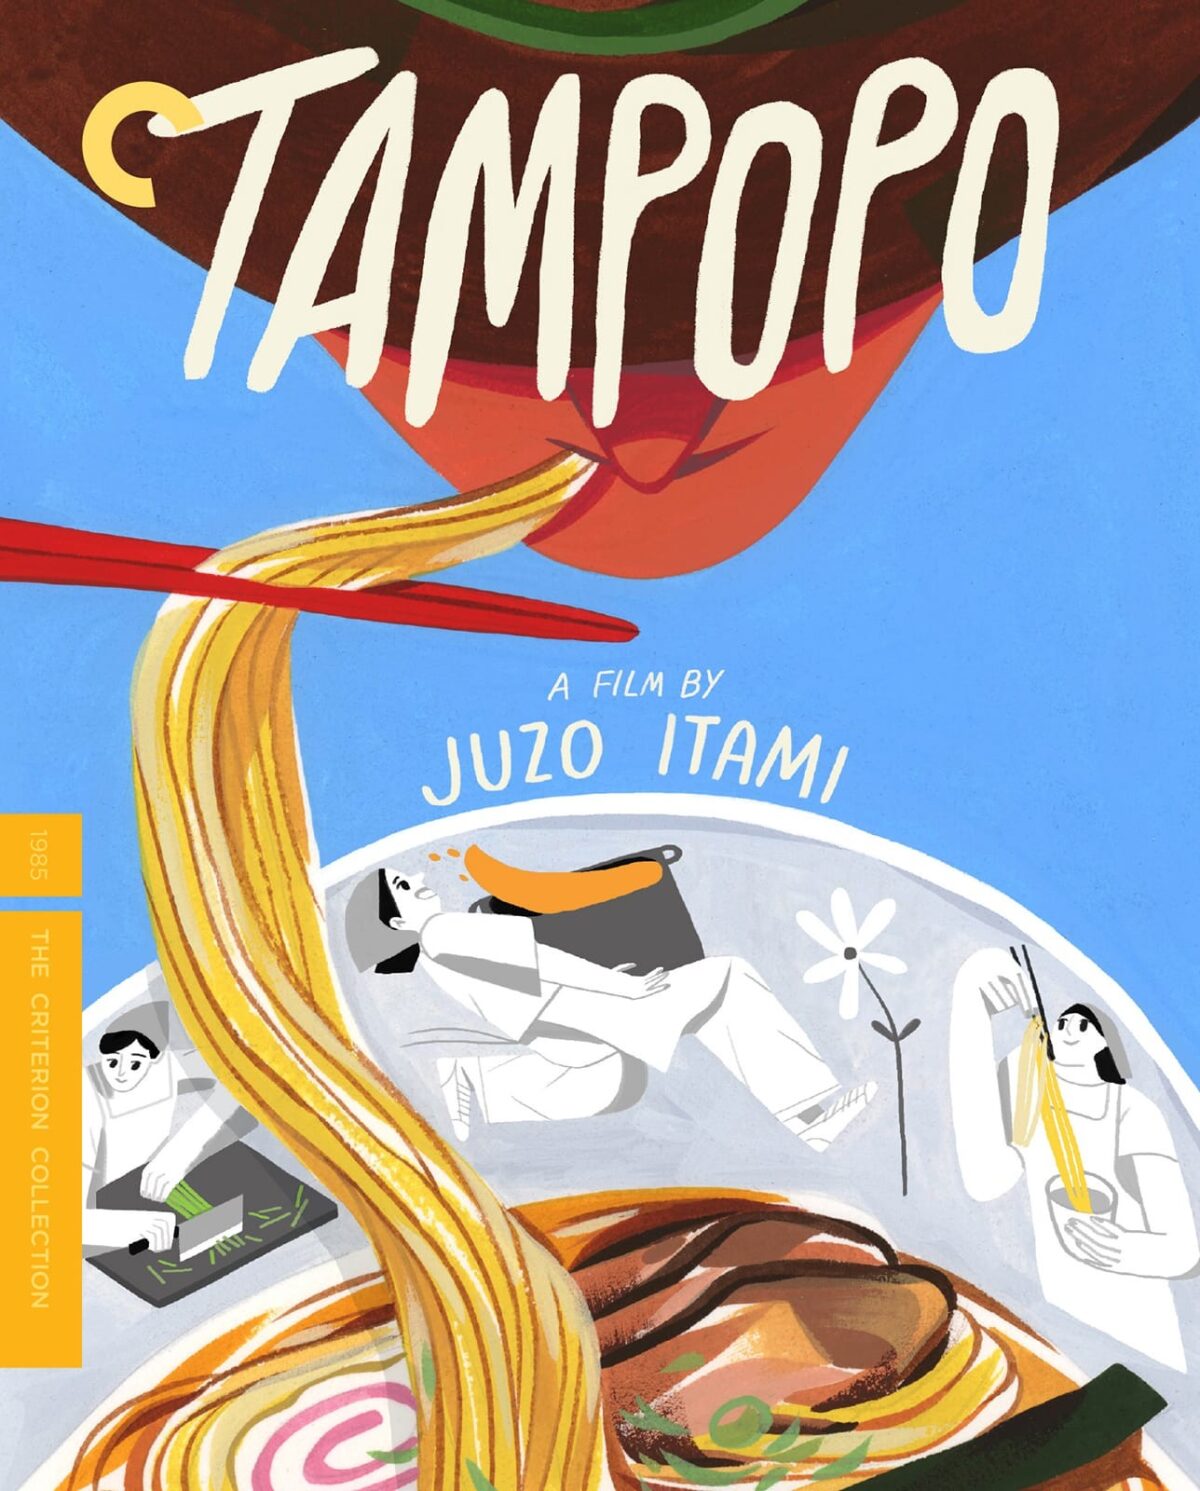 Alternate poster of Tampopo directed by Juzo Itami